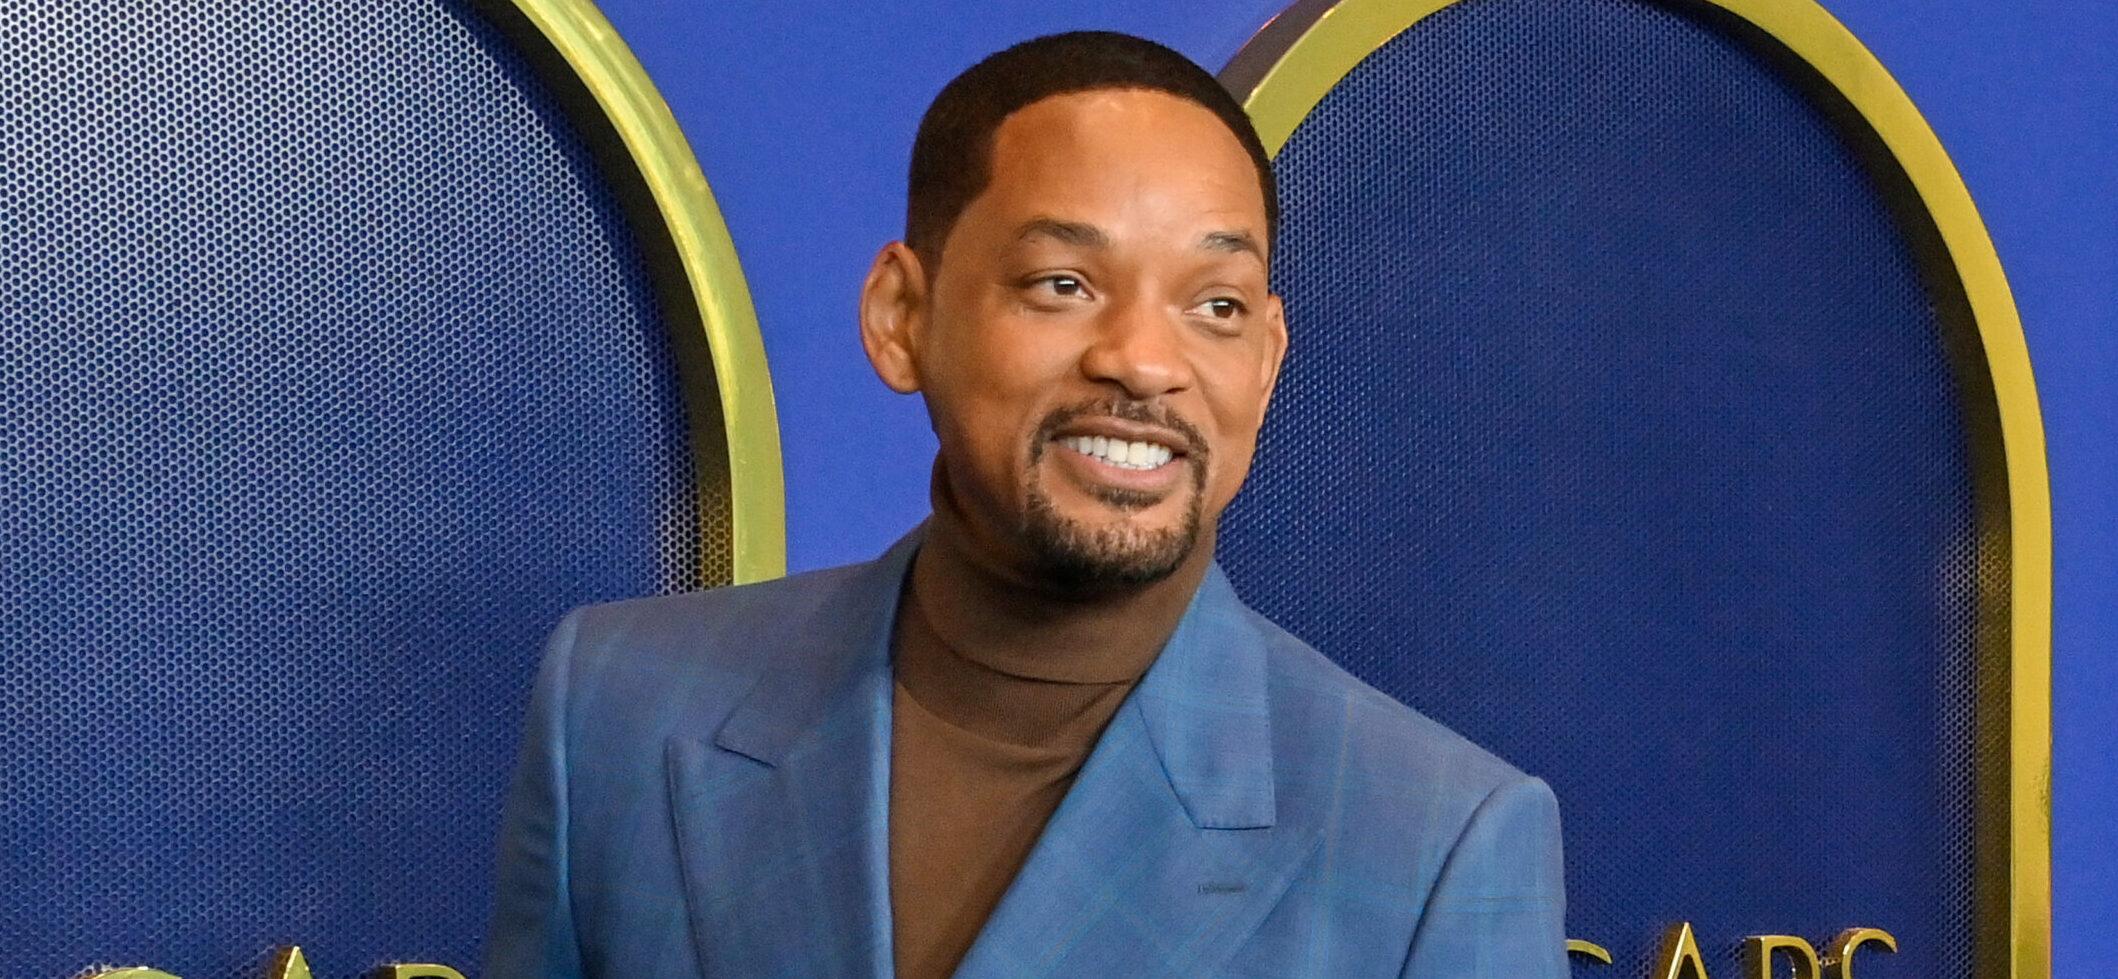 Will Smith at the Oscar Nominees Luncheon in Los Angeles